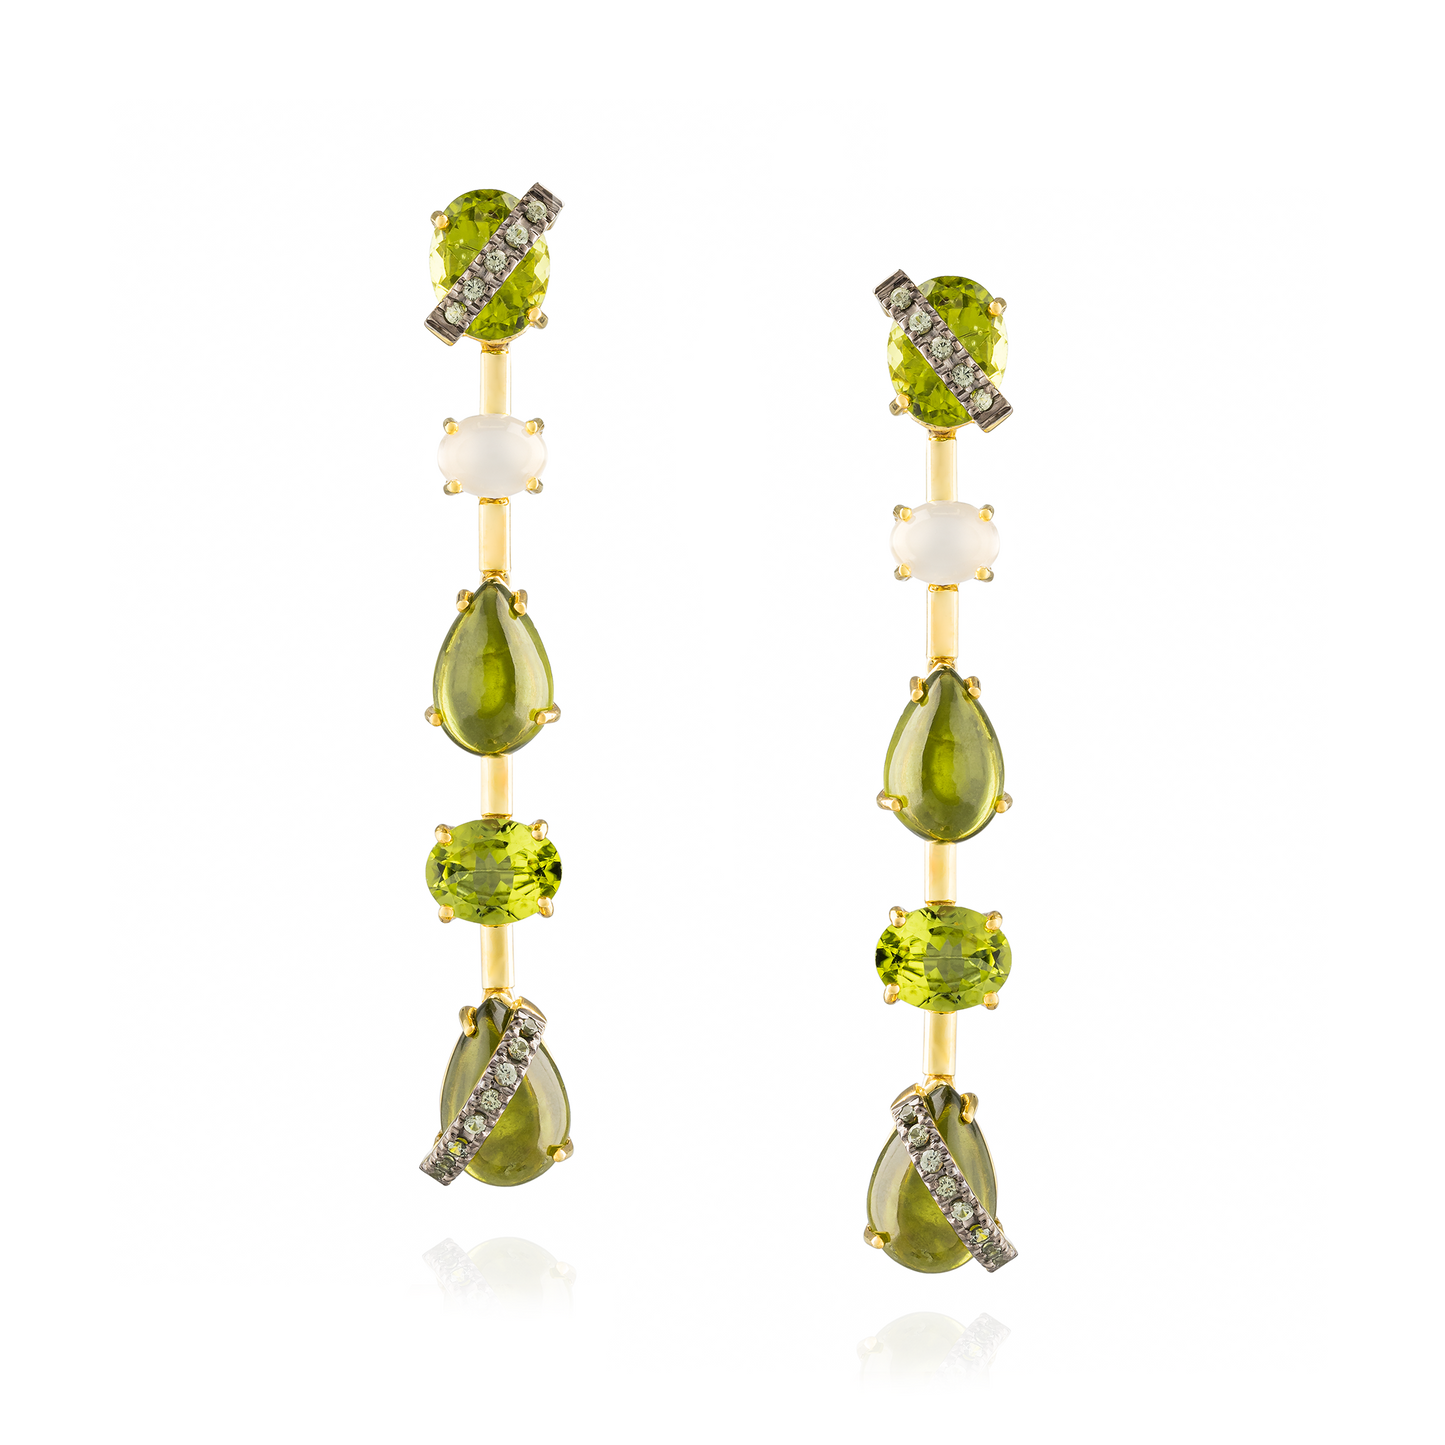 925 Silver Earrings with Faceted Peridot , Green Sapphire, Idocrase Cabouchons